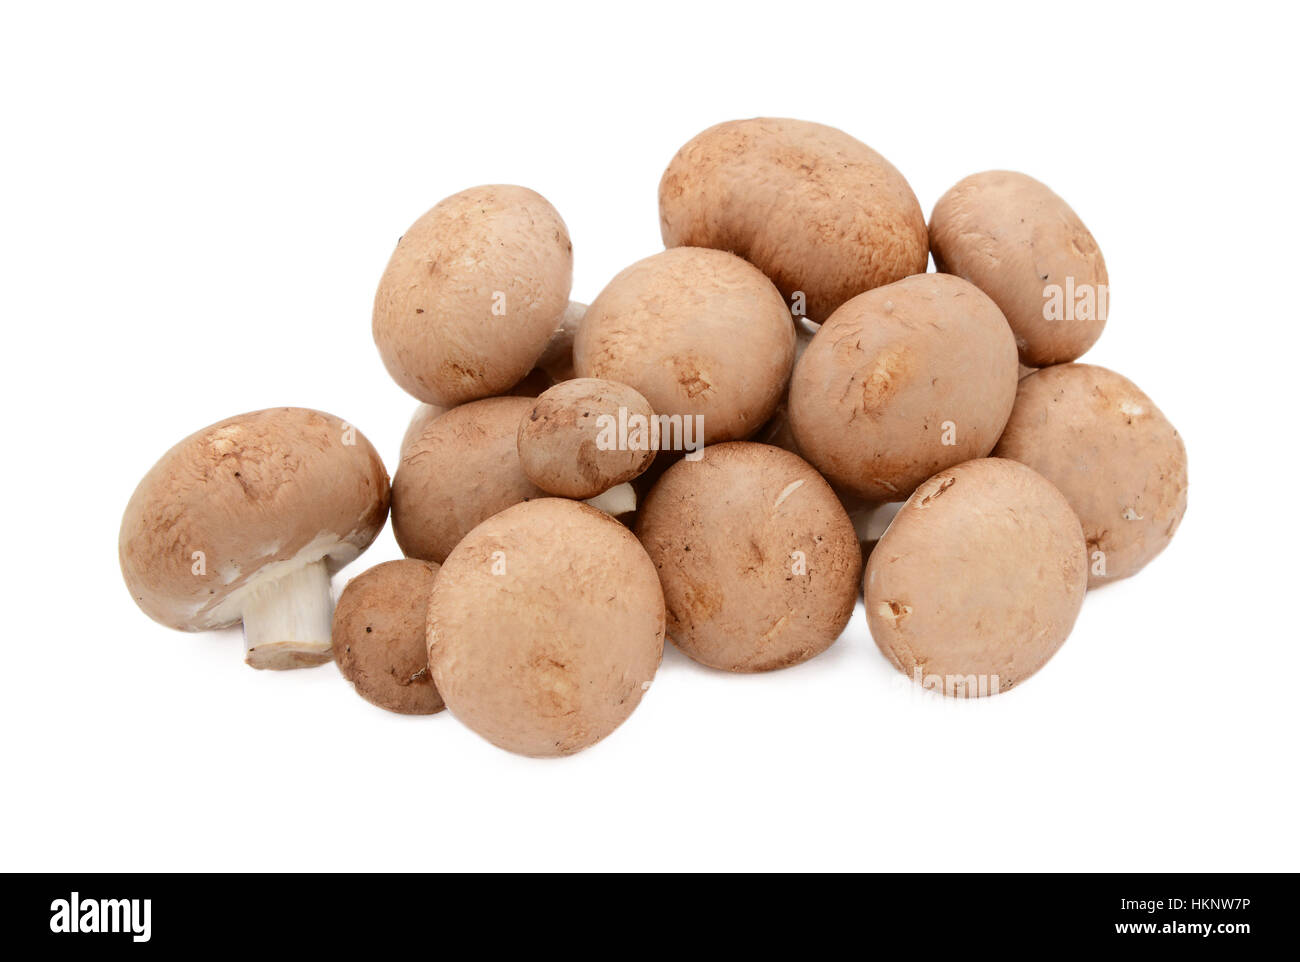 Uneven pile of fresh chestnut mushrooms with brown caps, isolated on a white background Stock Photo